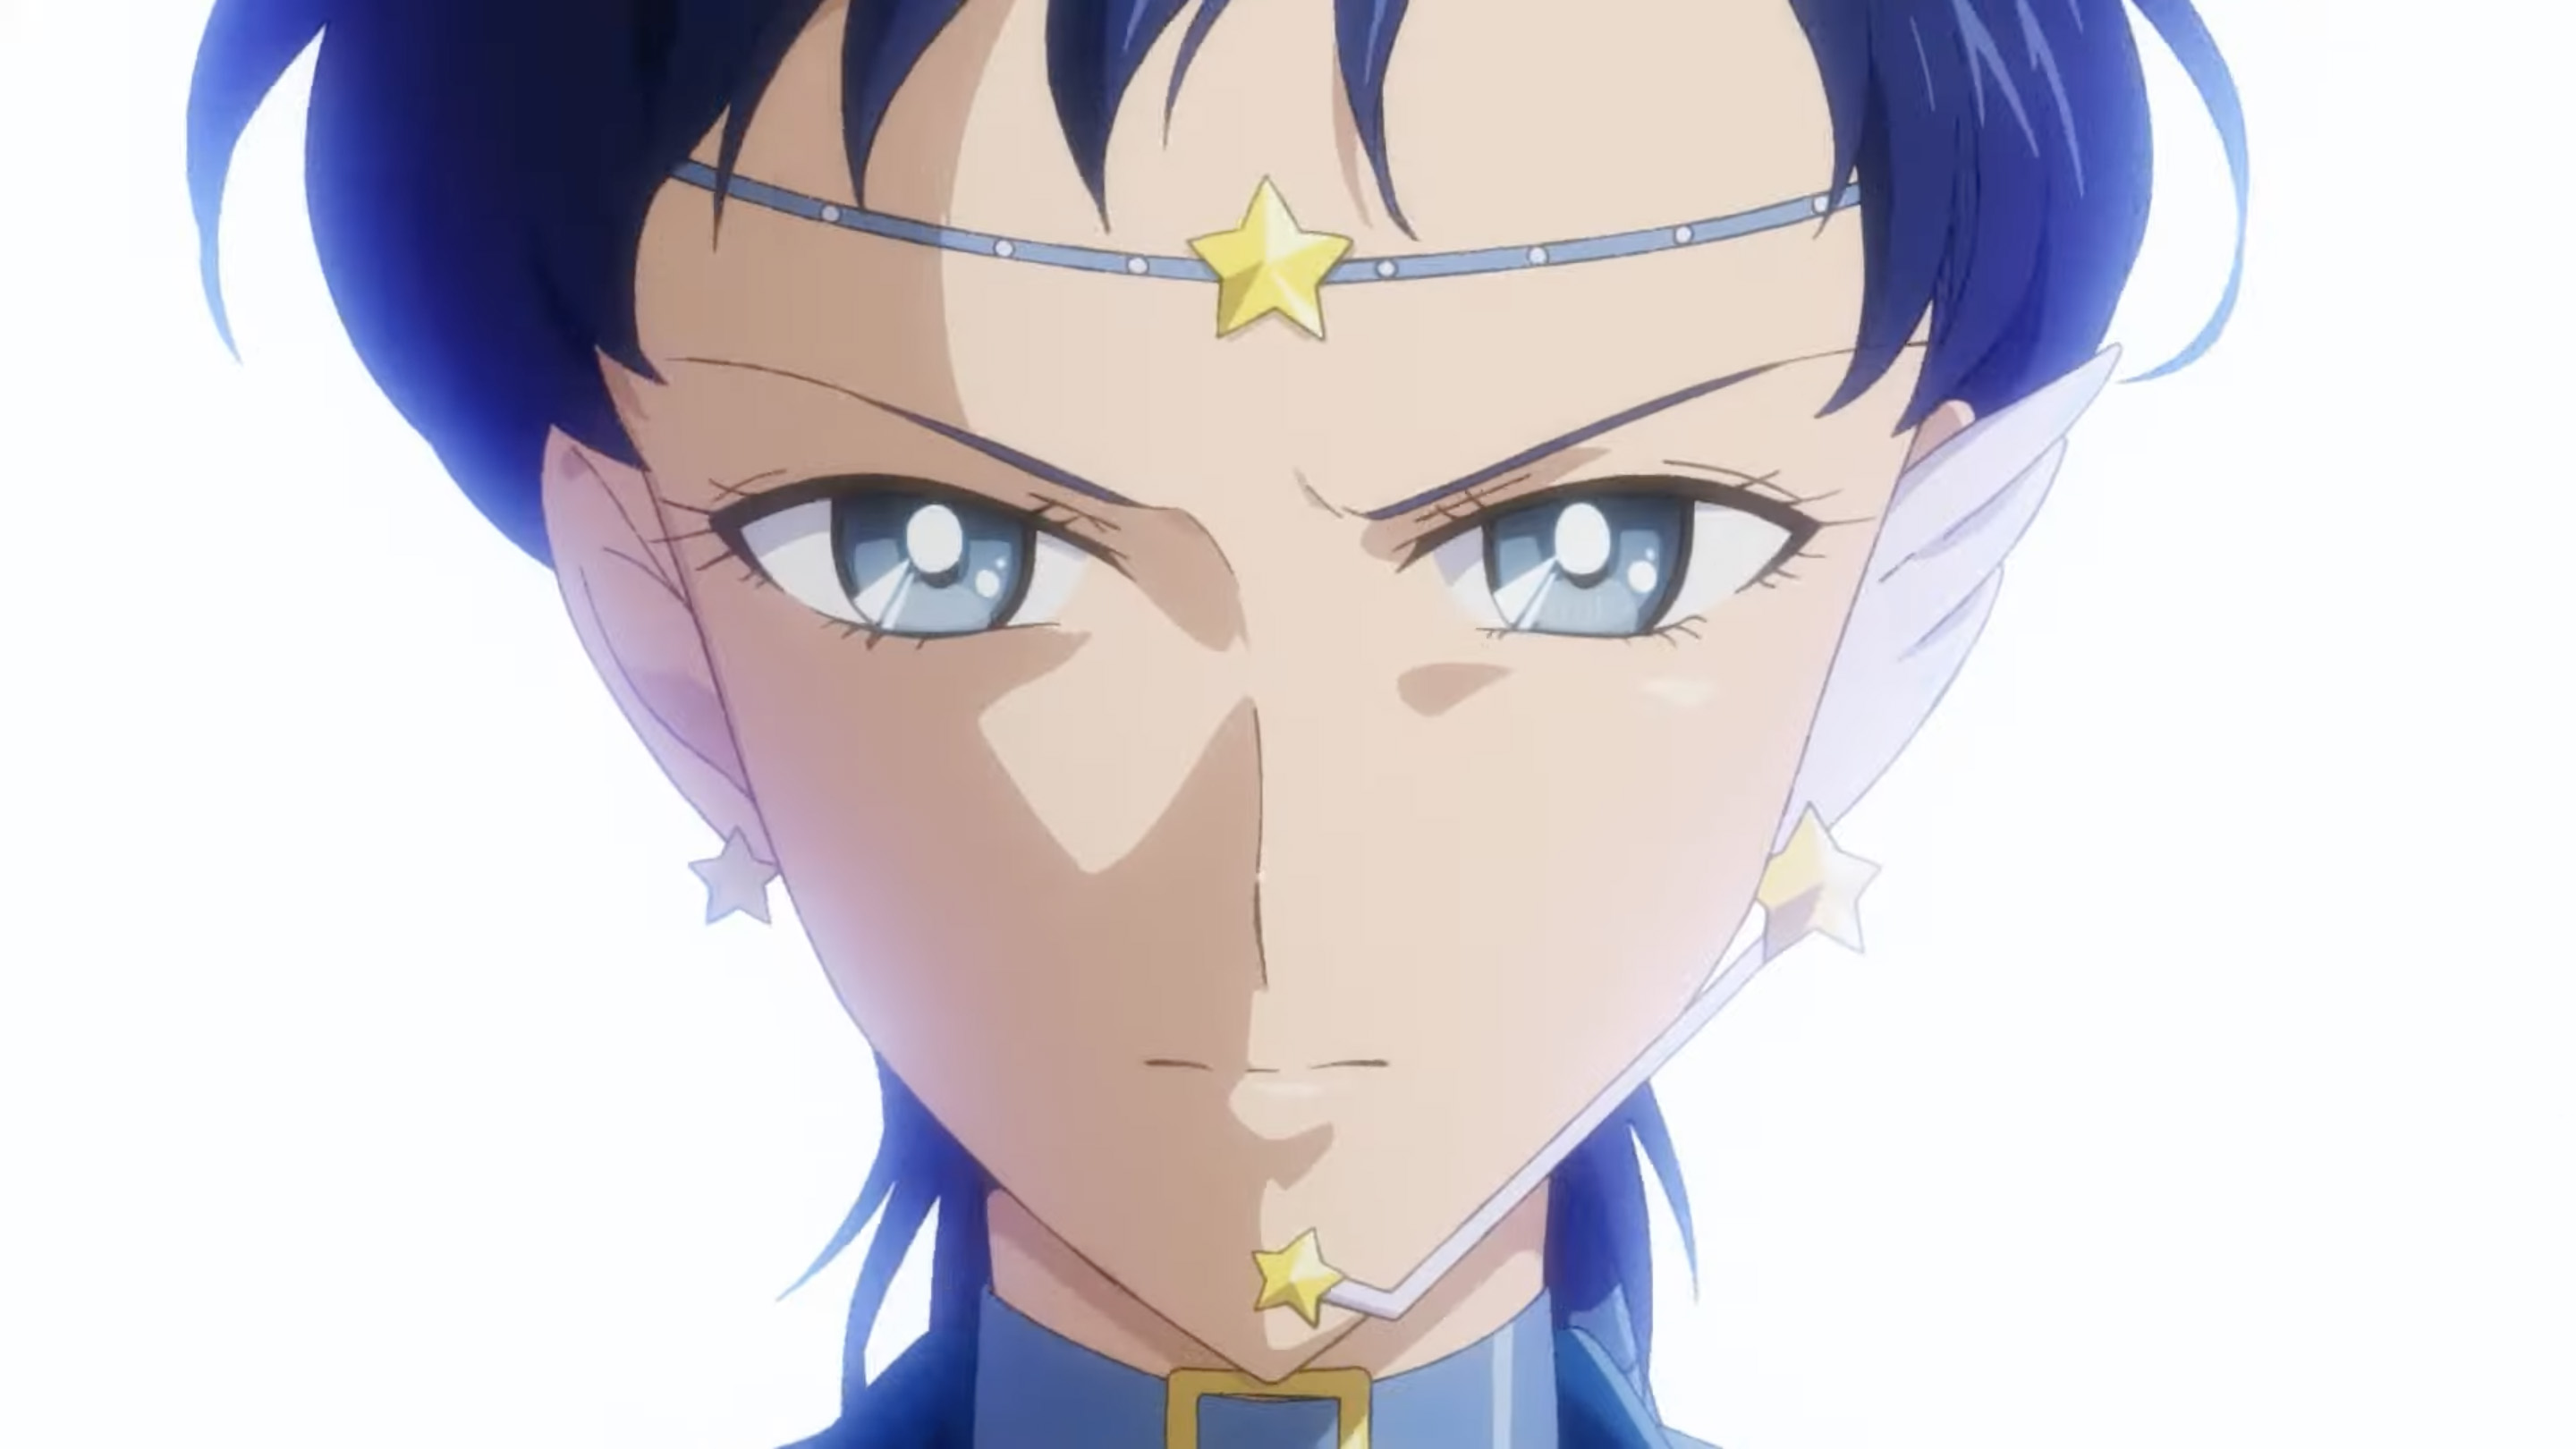 Sailor Moon Cosmos Anime Films Shine Brightly in New Trailer Featuring Sailor Starlights